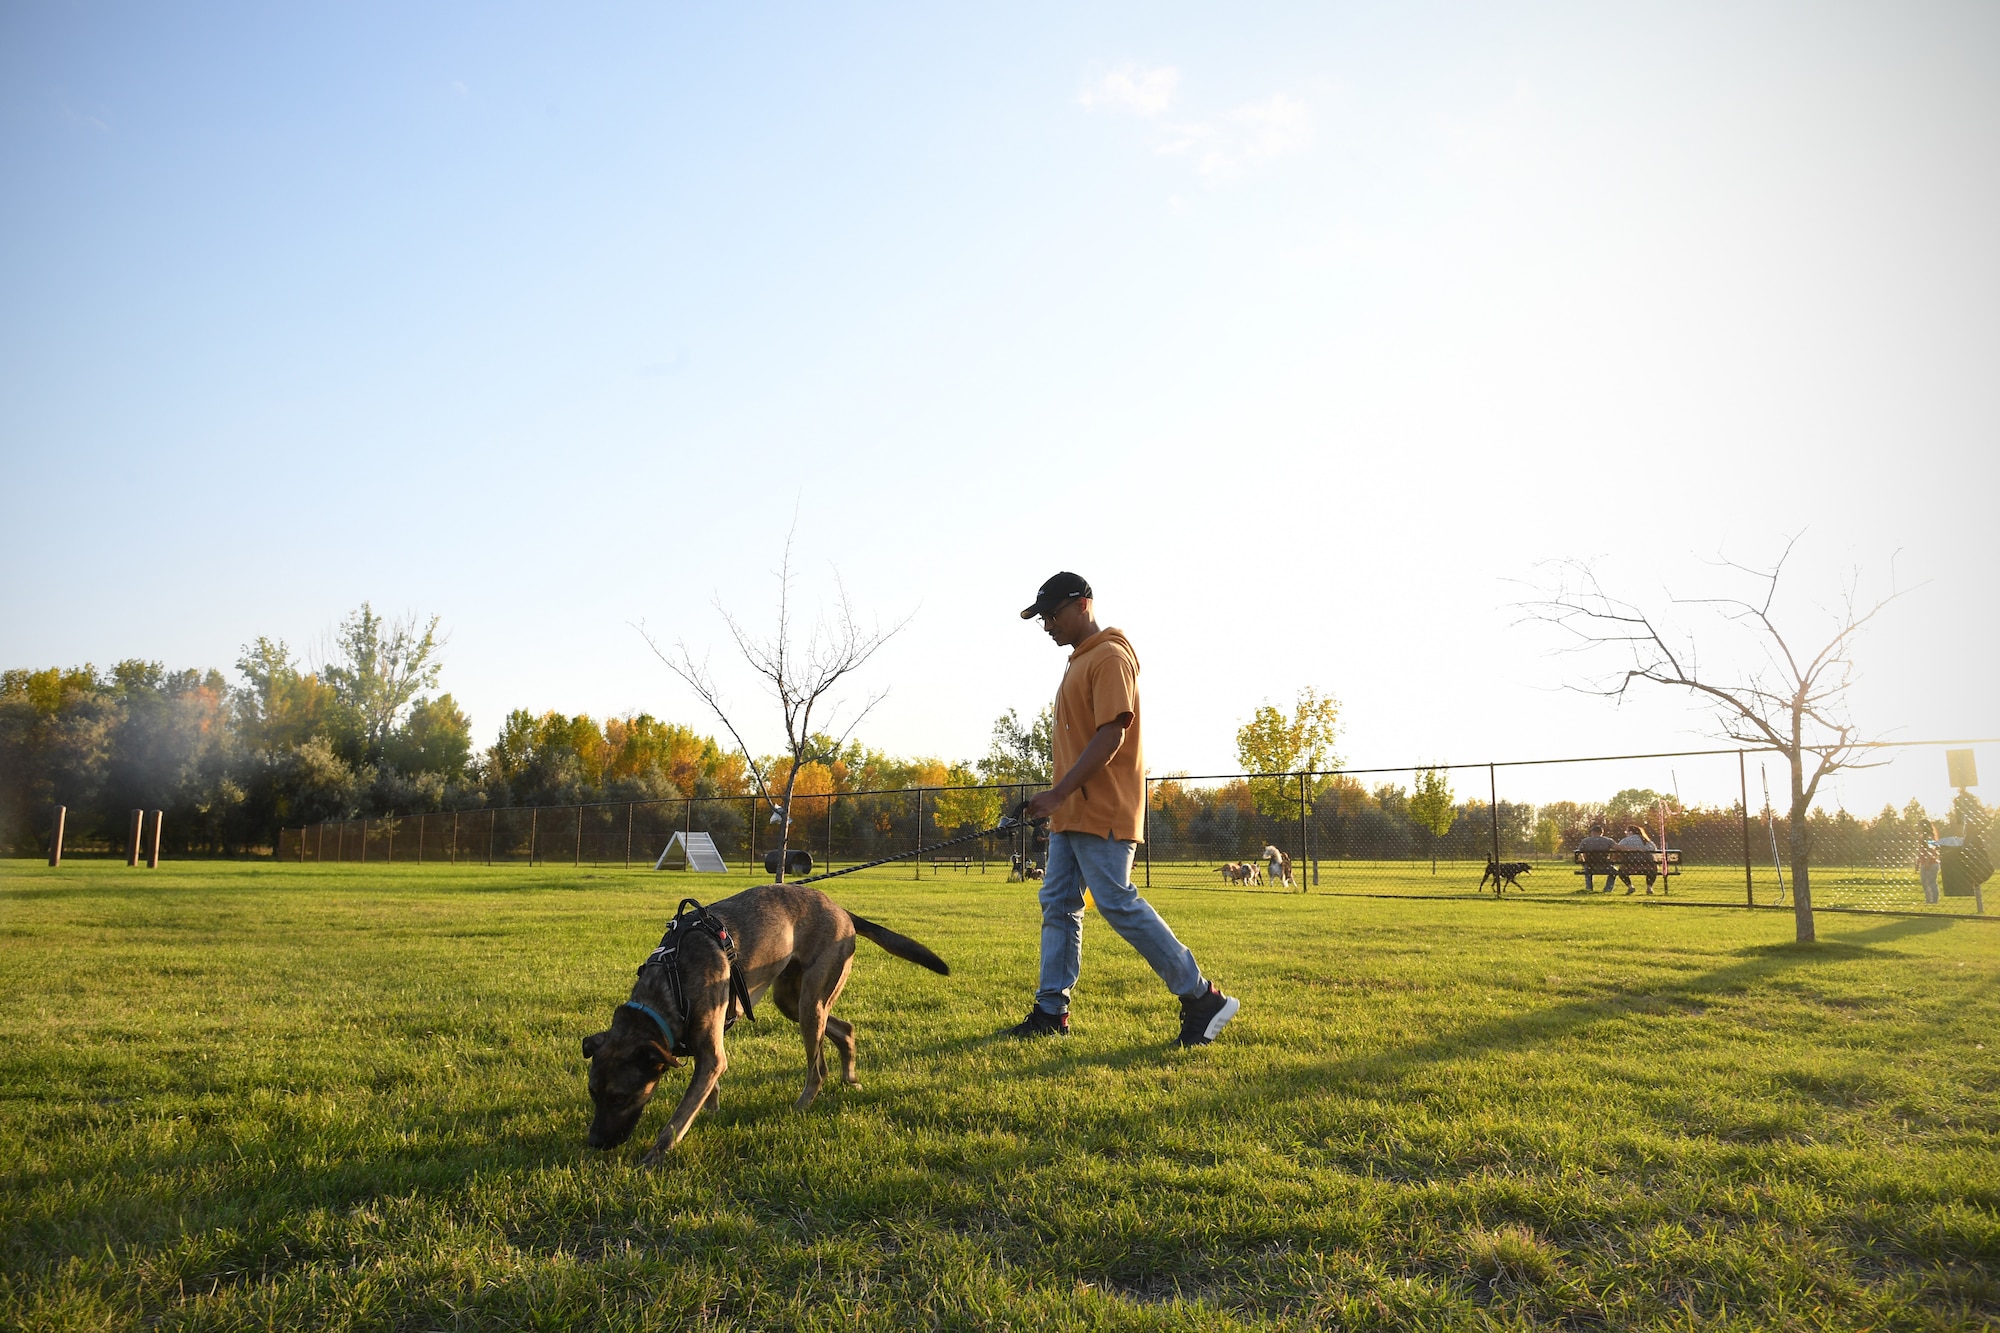 Senior Airman Elijaih Tiggs, 319th Reconnaissance Wing photojournalist journeyman, walks Memphis, his 2-year-old Australian Cattle Dog mix, out of the dog park after “Tactical Paws” Sept. 18, 2019, on Grand Forks Air Force Base, North Dakota. Tactical Paws was a base event for Airmen and their dogs to play, socialize and relax after work. The event was inspired by recent resilience tactical pauses across the U.S. Air Force, in which Airmen had a day to be with their wingmen and discuss the importance of mental health and different avenues of help or support offered to those who need it. (U.S. Air Force photo by Senior Airman Elora J. Martinez)